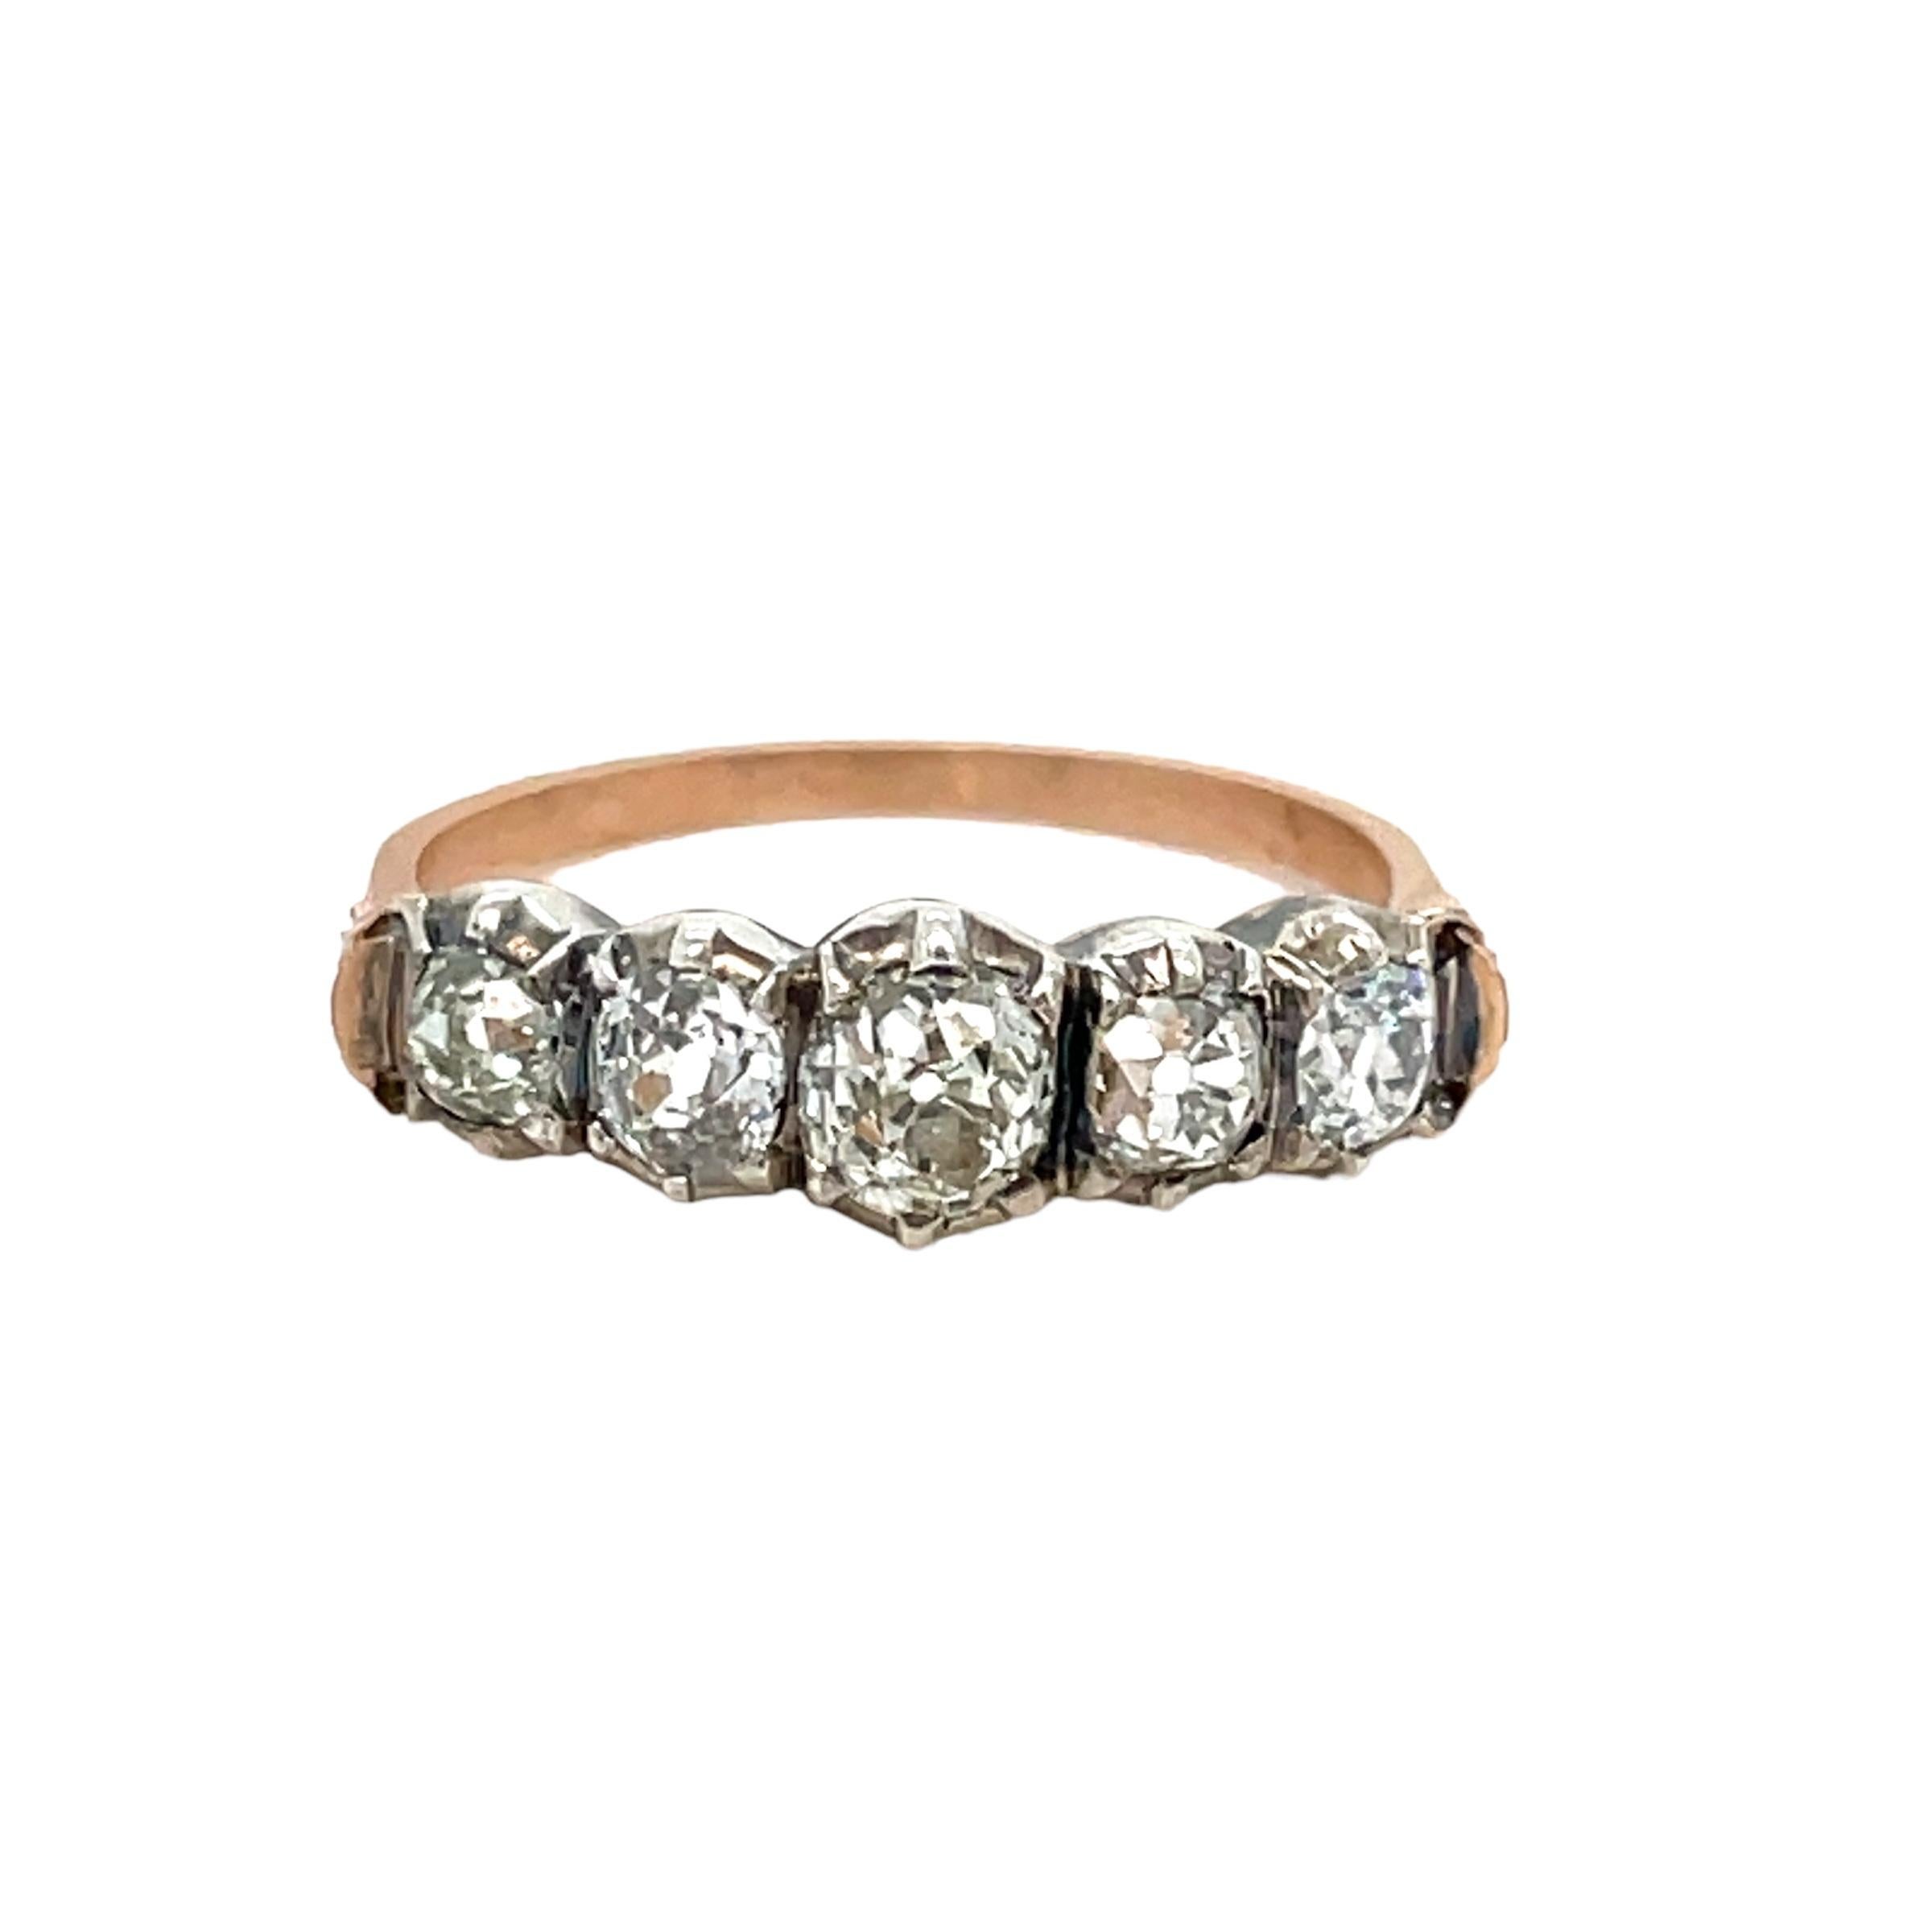  A stunning timeless diamond band ring set with five old mine cut shiny and sparkly Diamonds total 1.45 ct. estimated to be H/I in Color and VS/SI in Clarity.
The band is set in 18k rose gold and silver. Circa 1900

CONDITION: Pre-Owned -